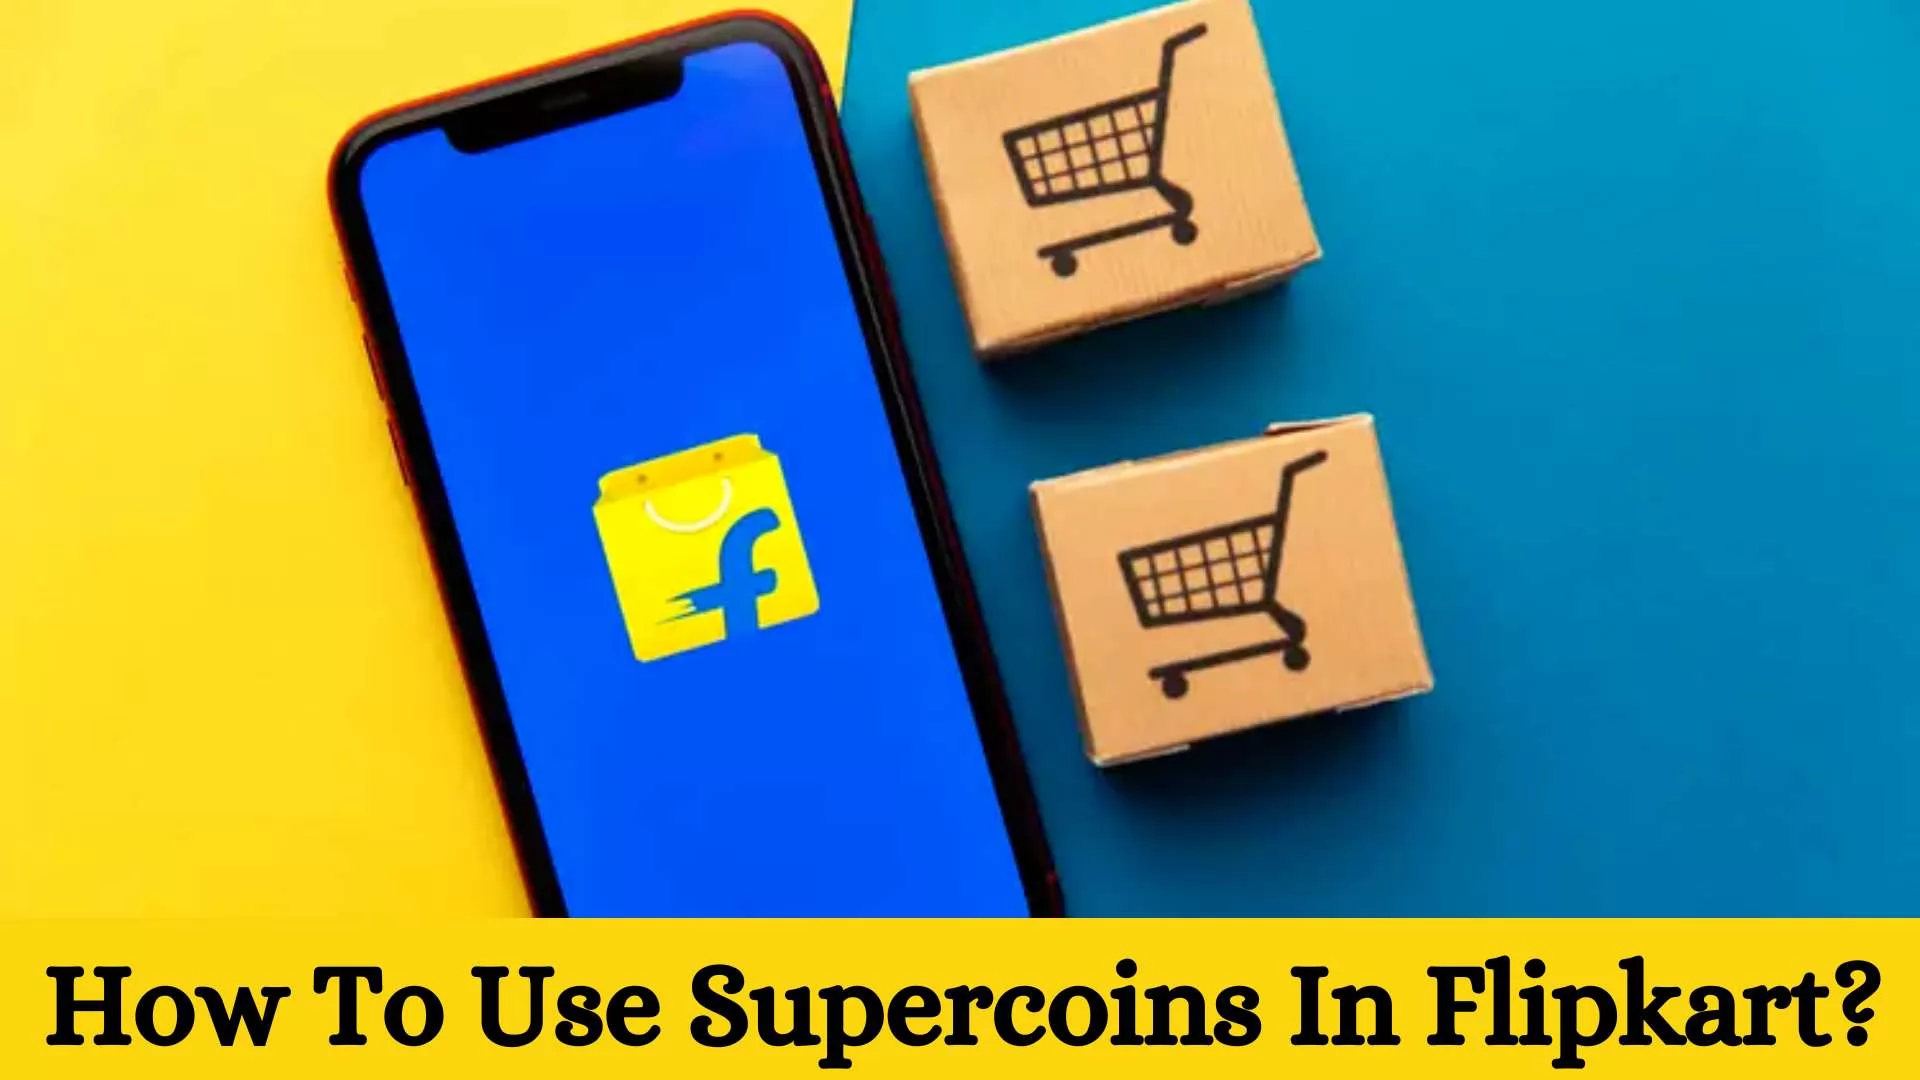 How To Use Supercoins In Flipkart